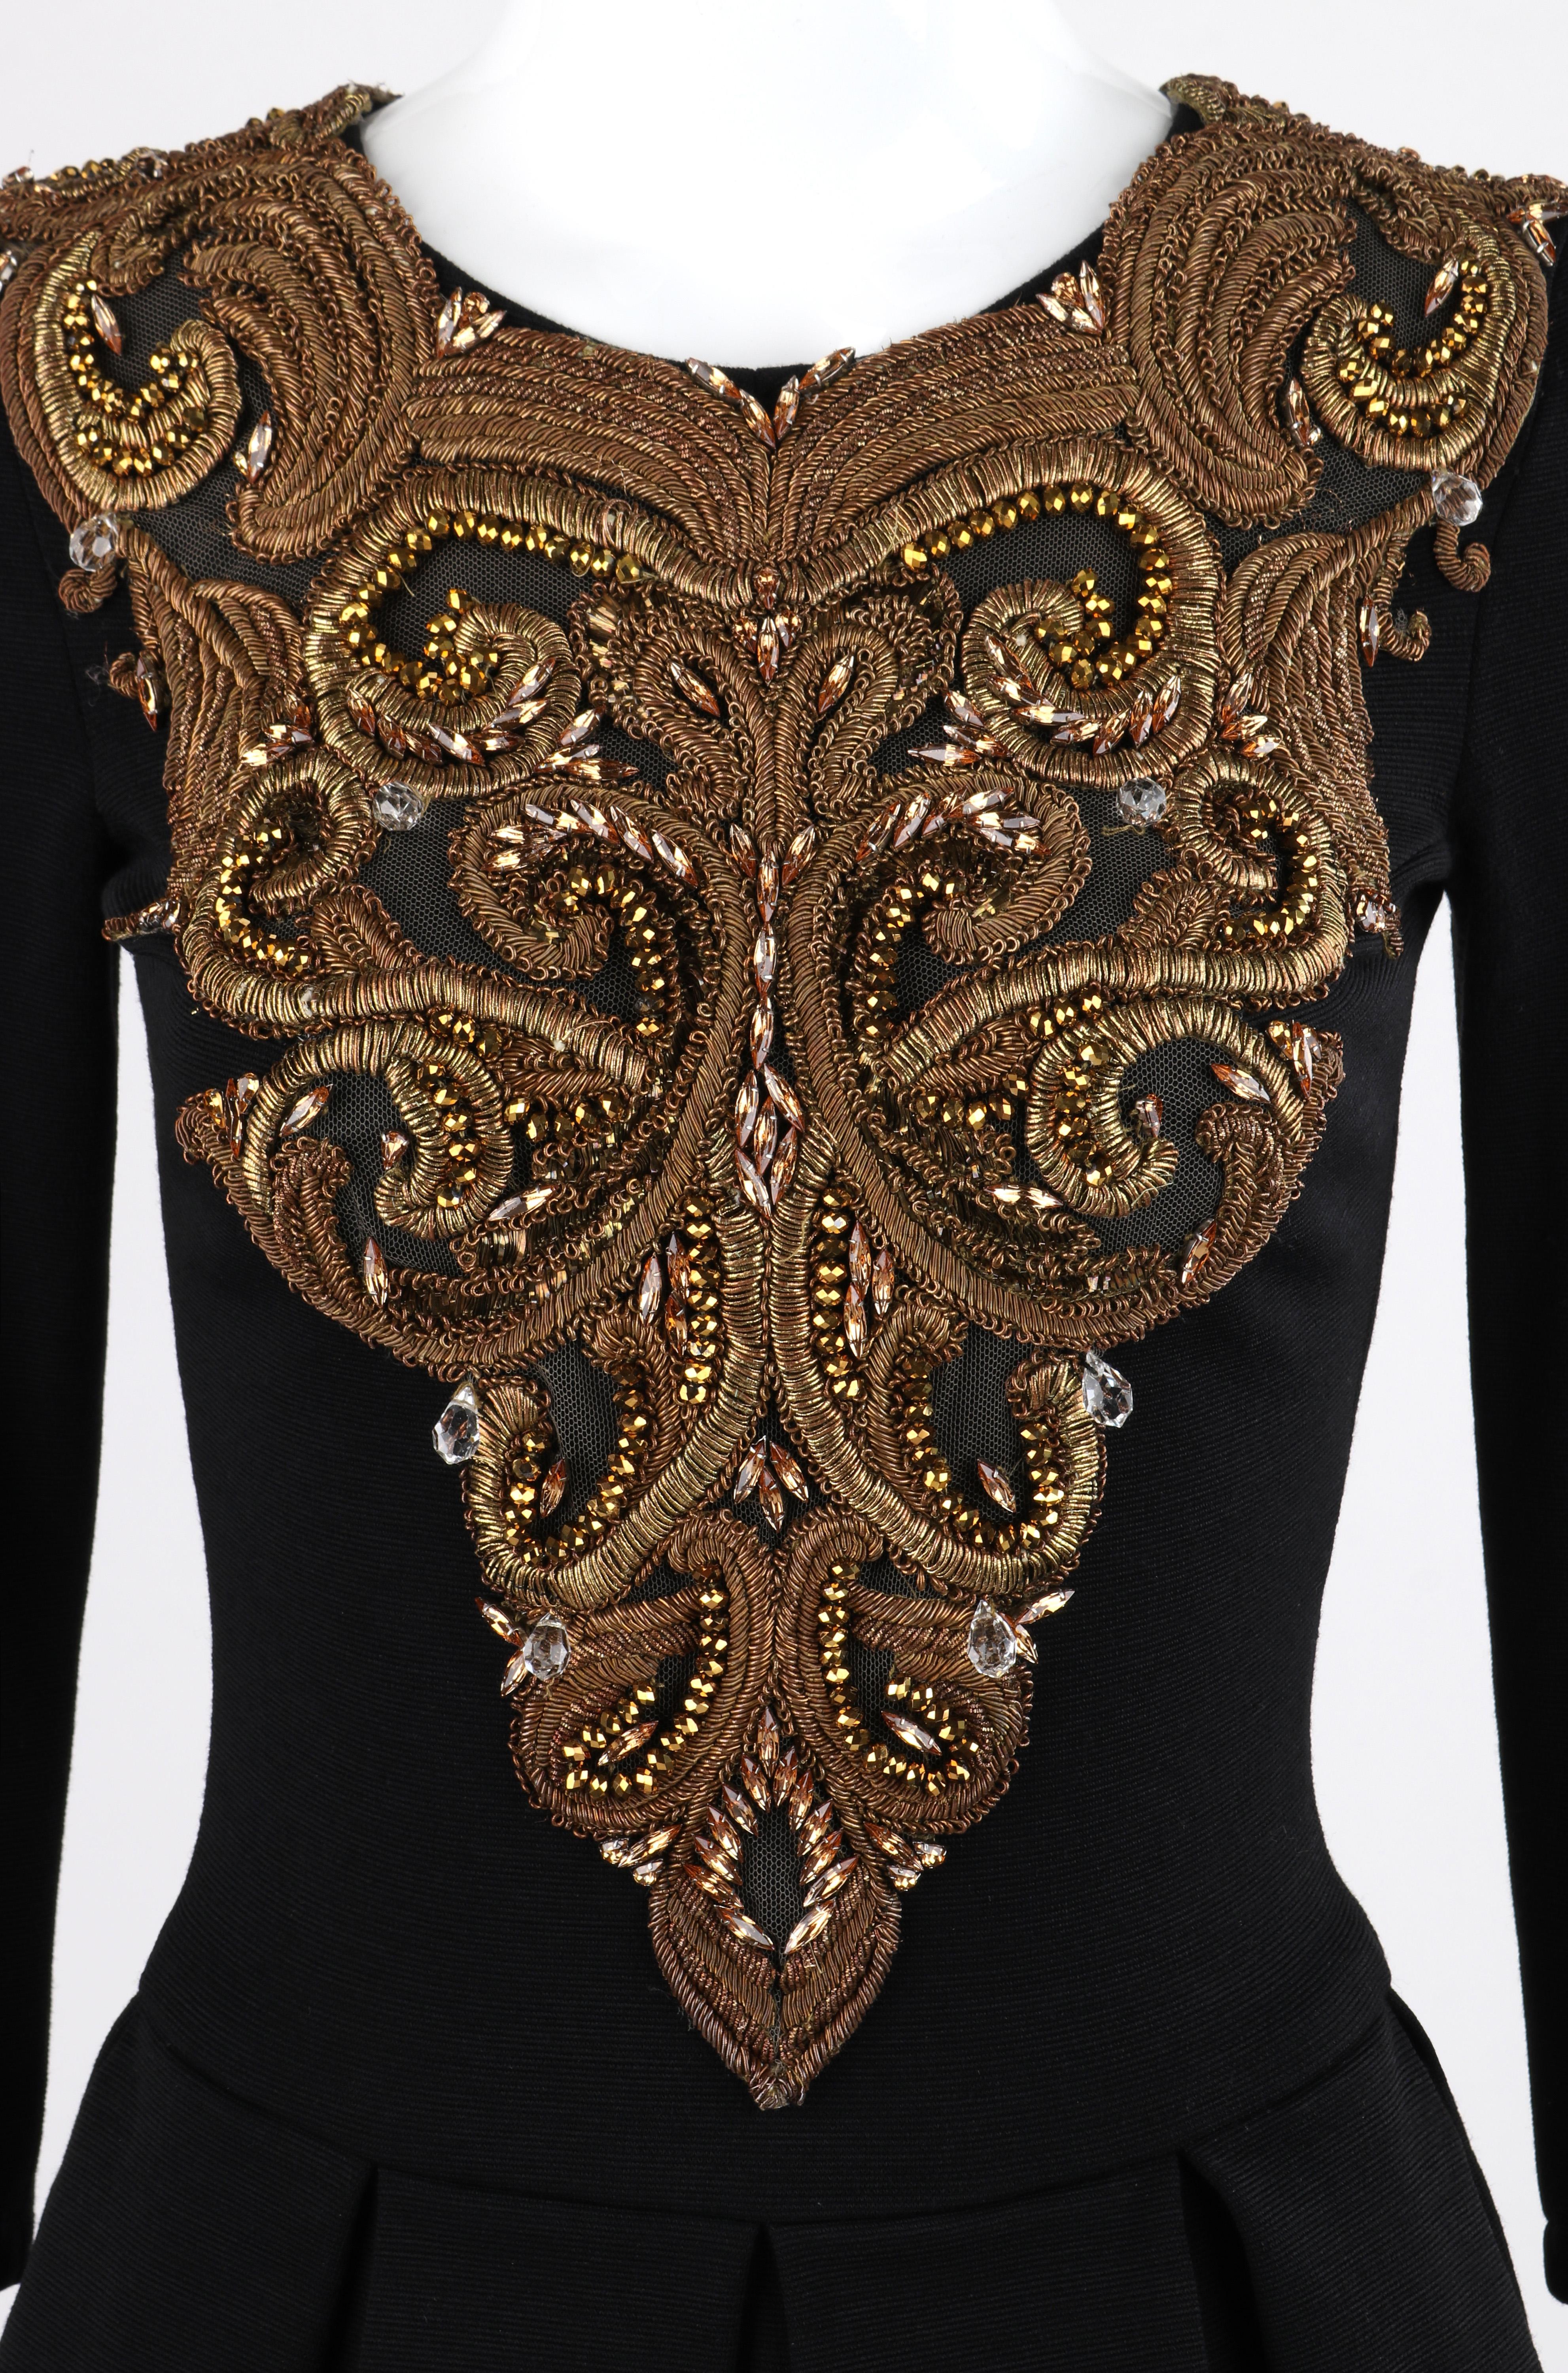 ALEXANDER McQUEEN A/W 2010 “Angels & Demons” Black Gold Beaded Fit n Flare Dress For Sale 1